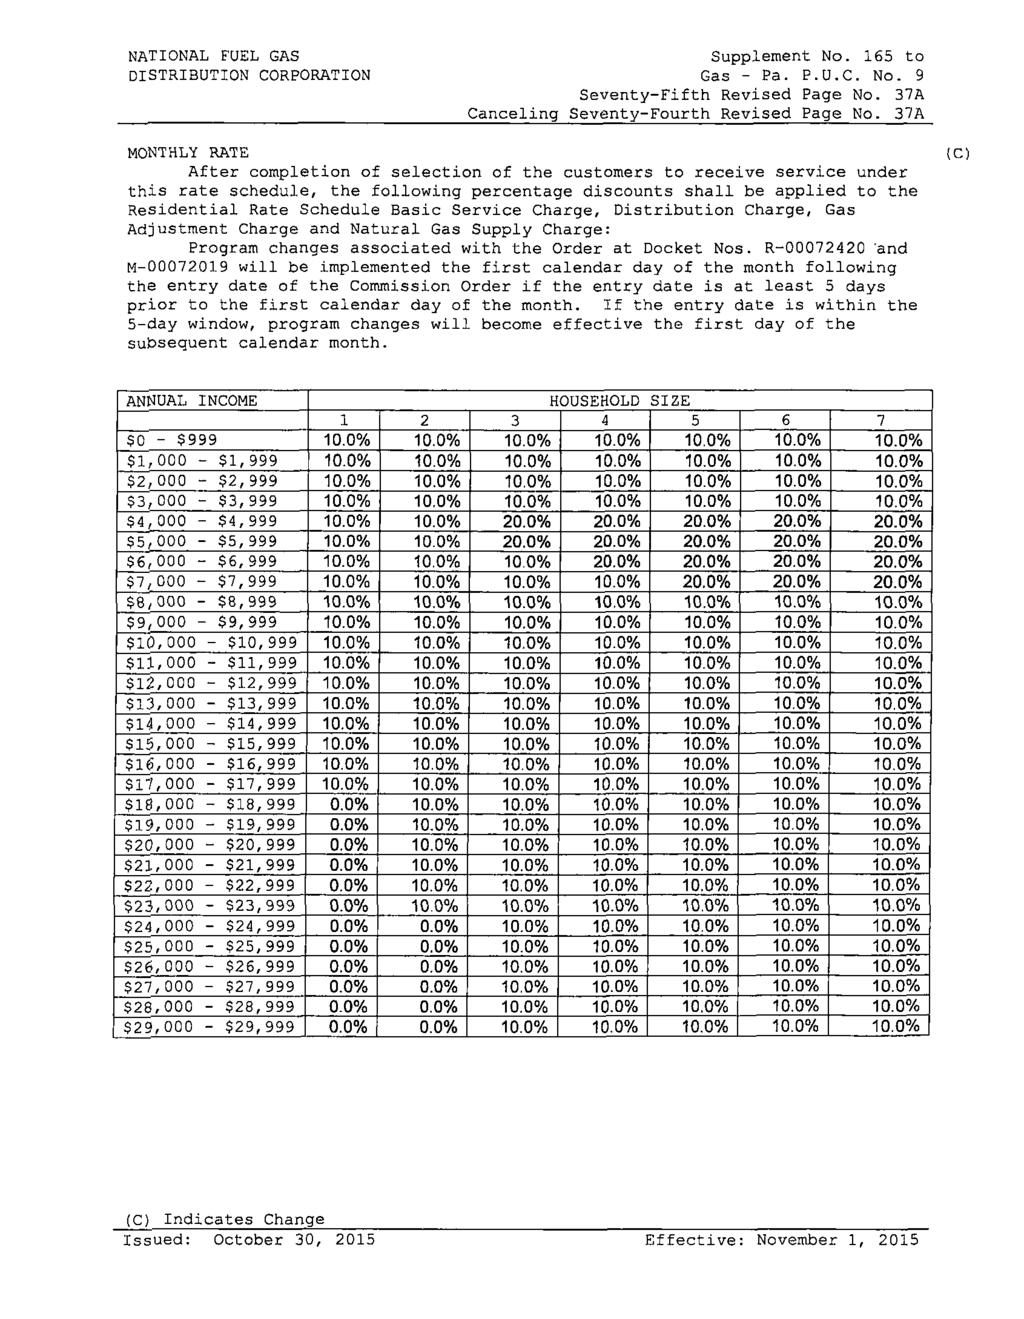 NATIONAL FUEL GAS DISTRIBUTION CORPORATION Supplement N. 165 t Gas - Pa. P.U.C. N. 9 Seventy-Fifth Revised Page N. 37A Canceling Seventy-Furth Revised Page N.